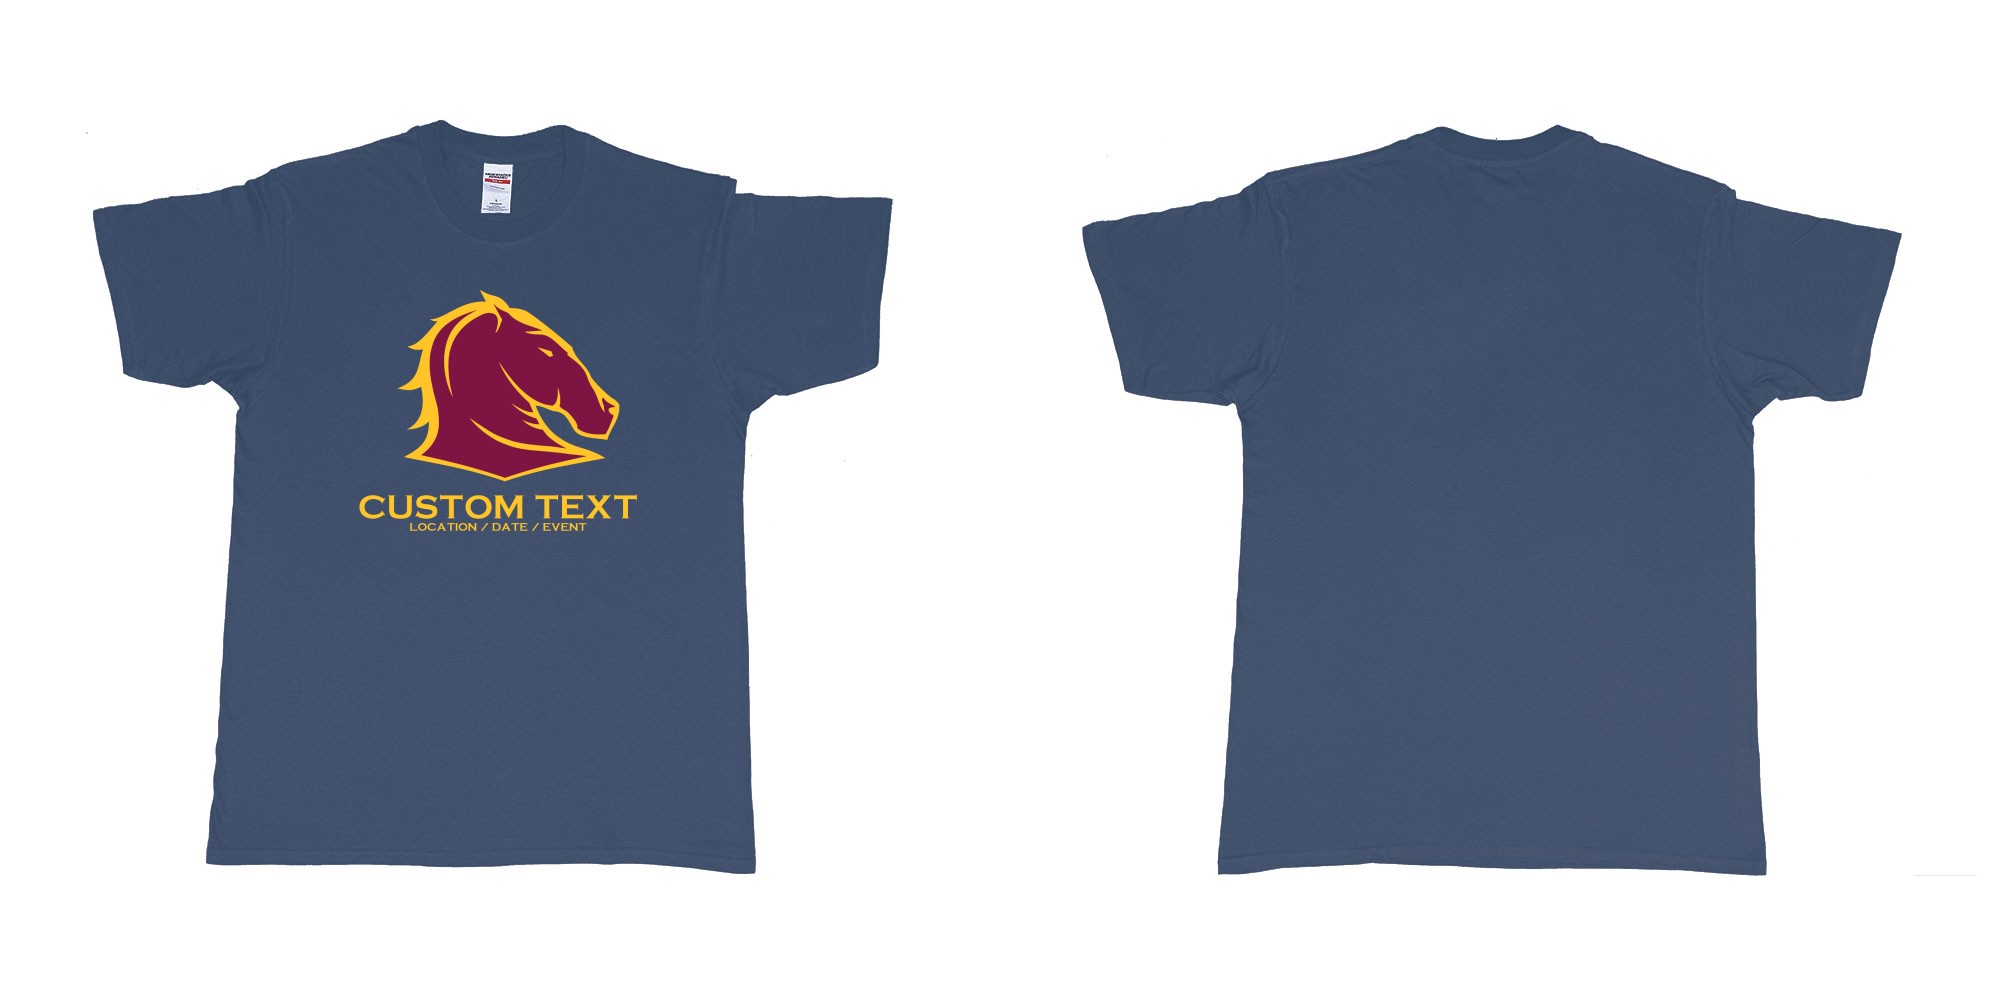 Custom tshirt design brisbane broncos australian professional rugby league football club queensland in fabric color navy choice your own text made in Bali by The Pirate Way